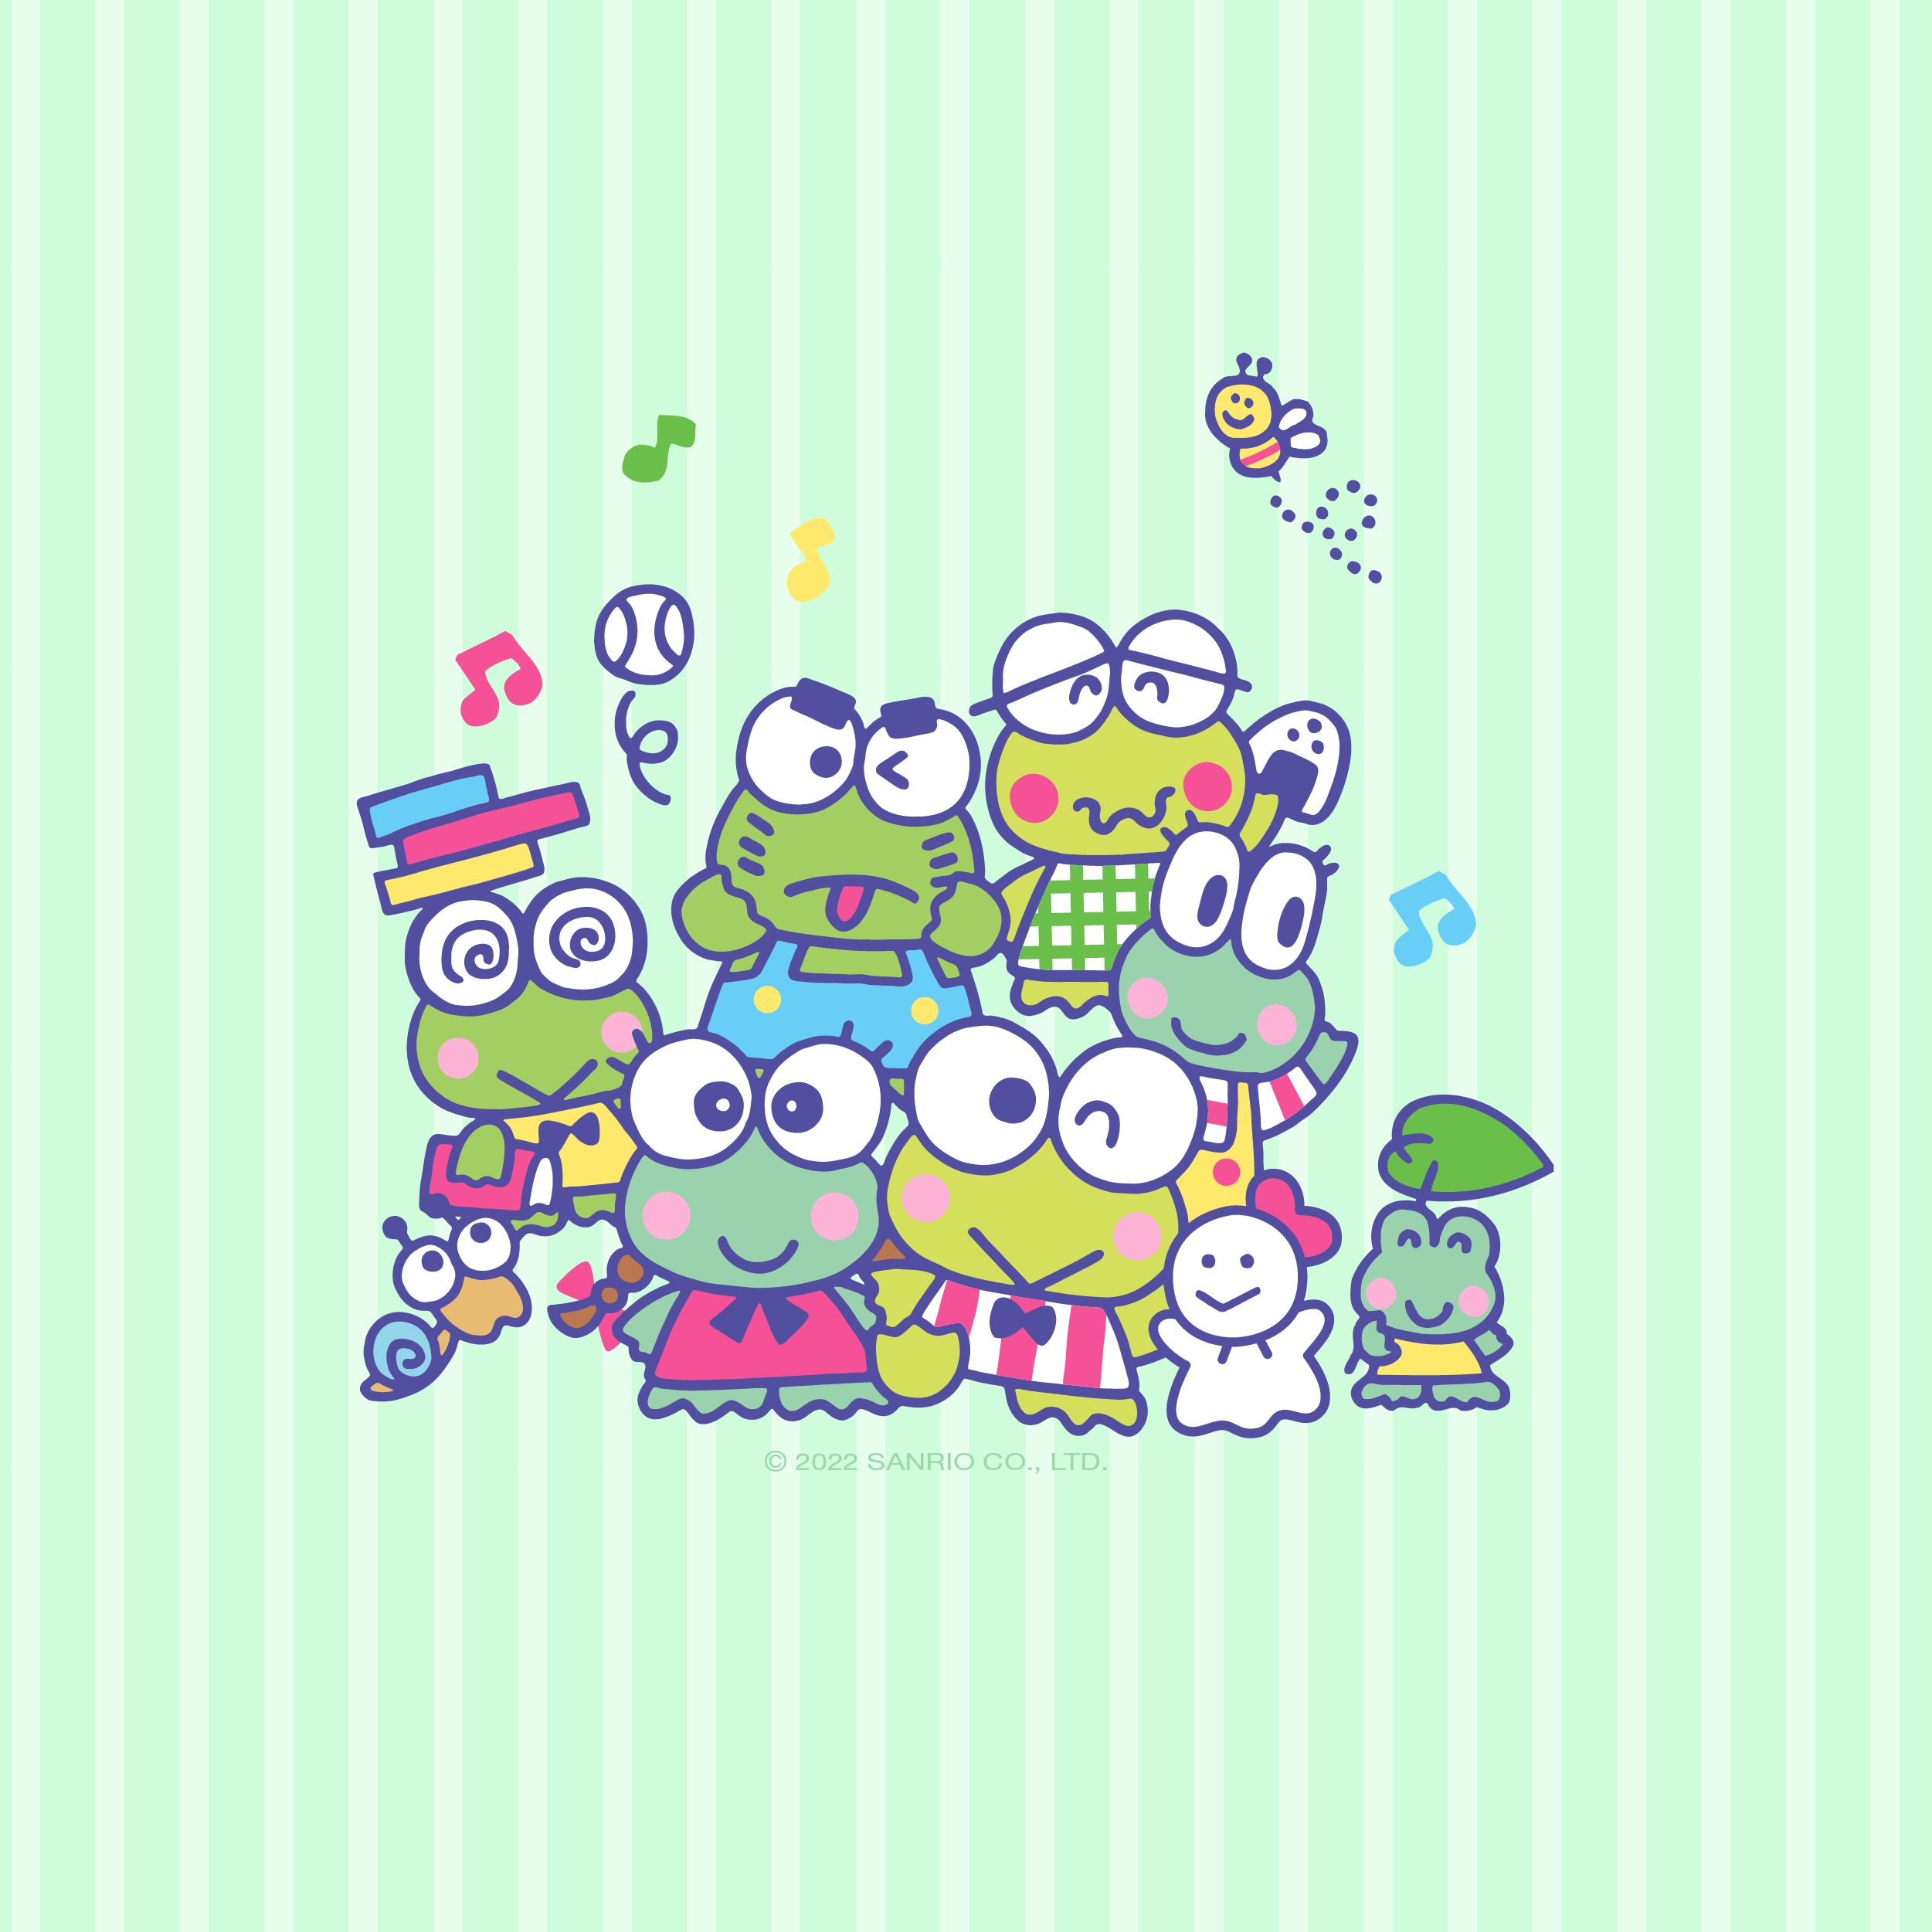 Sanrio on take keroppi on the go with new backgrounds for your phoneðð download your favorite wallpaper here httpstcosejkuwo httpstcoxnthagfp